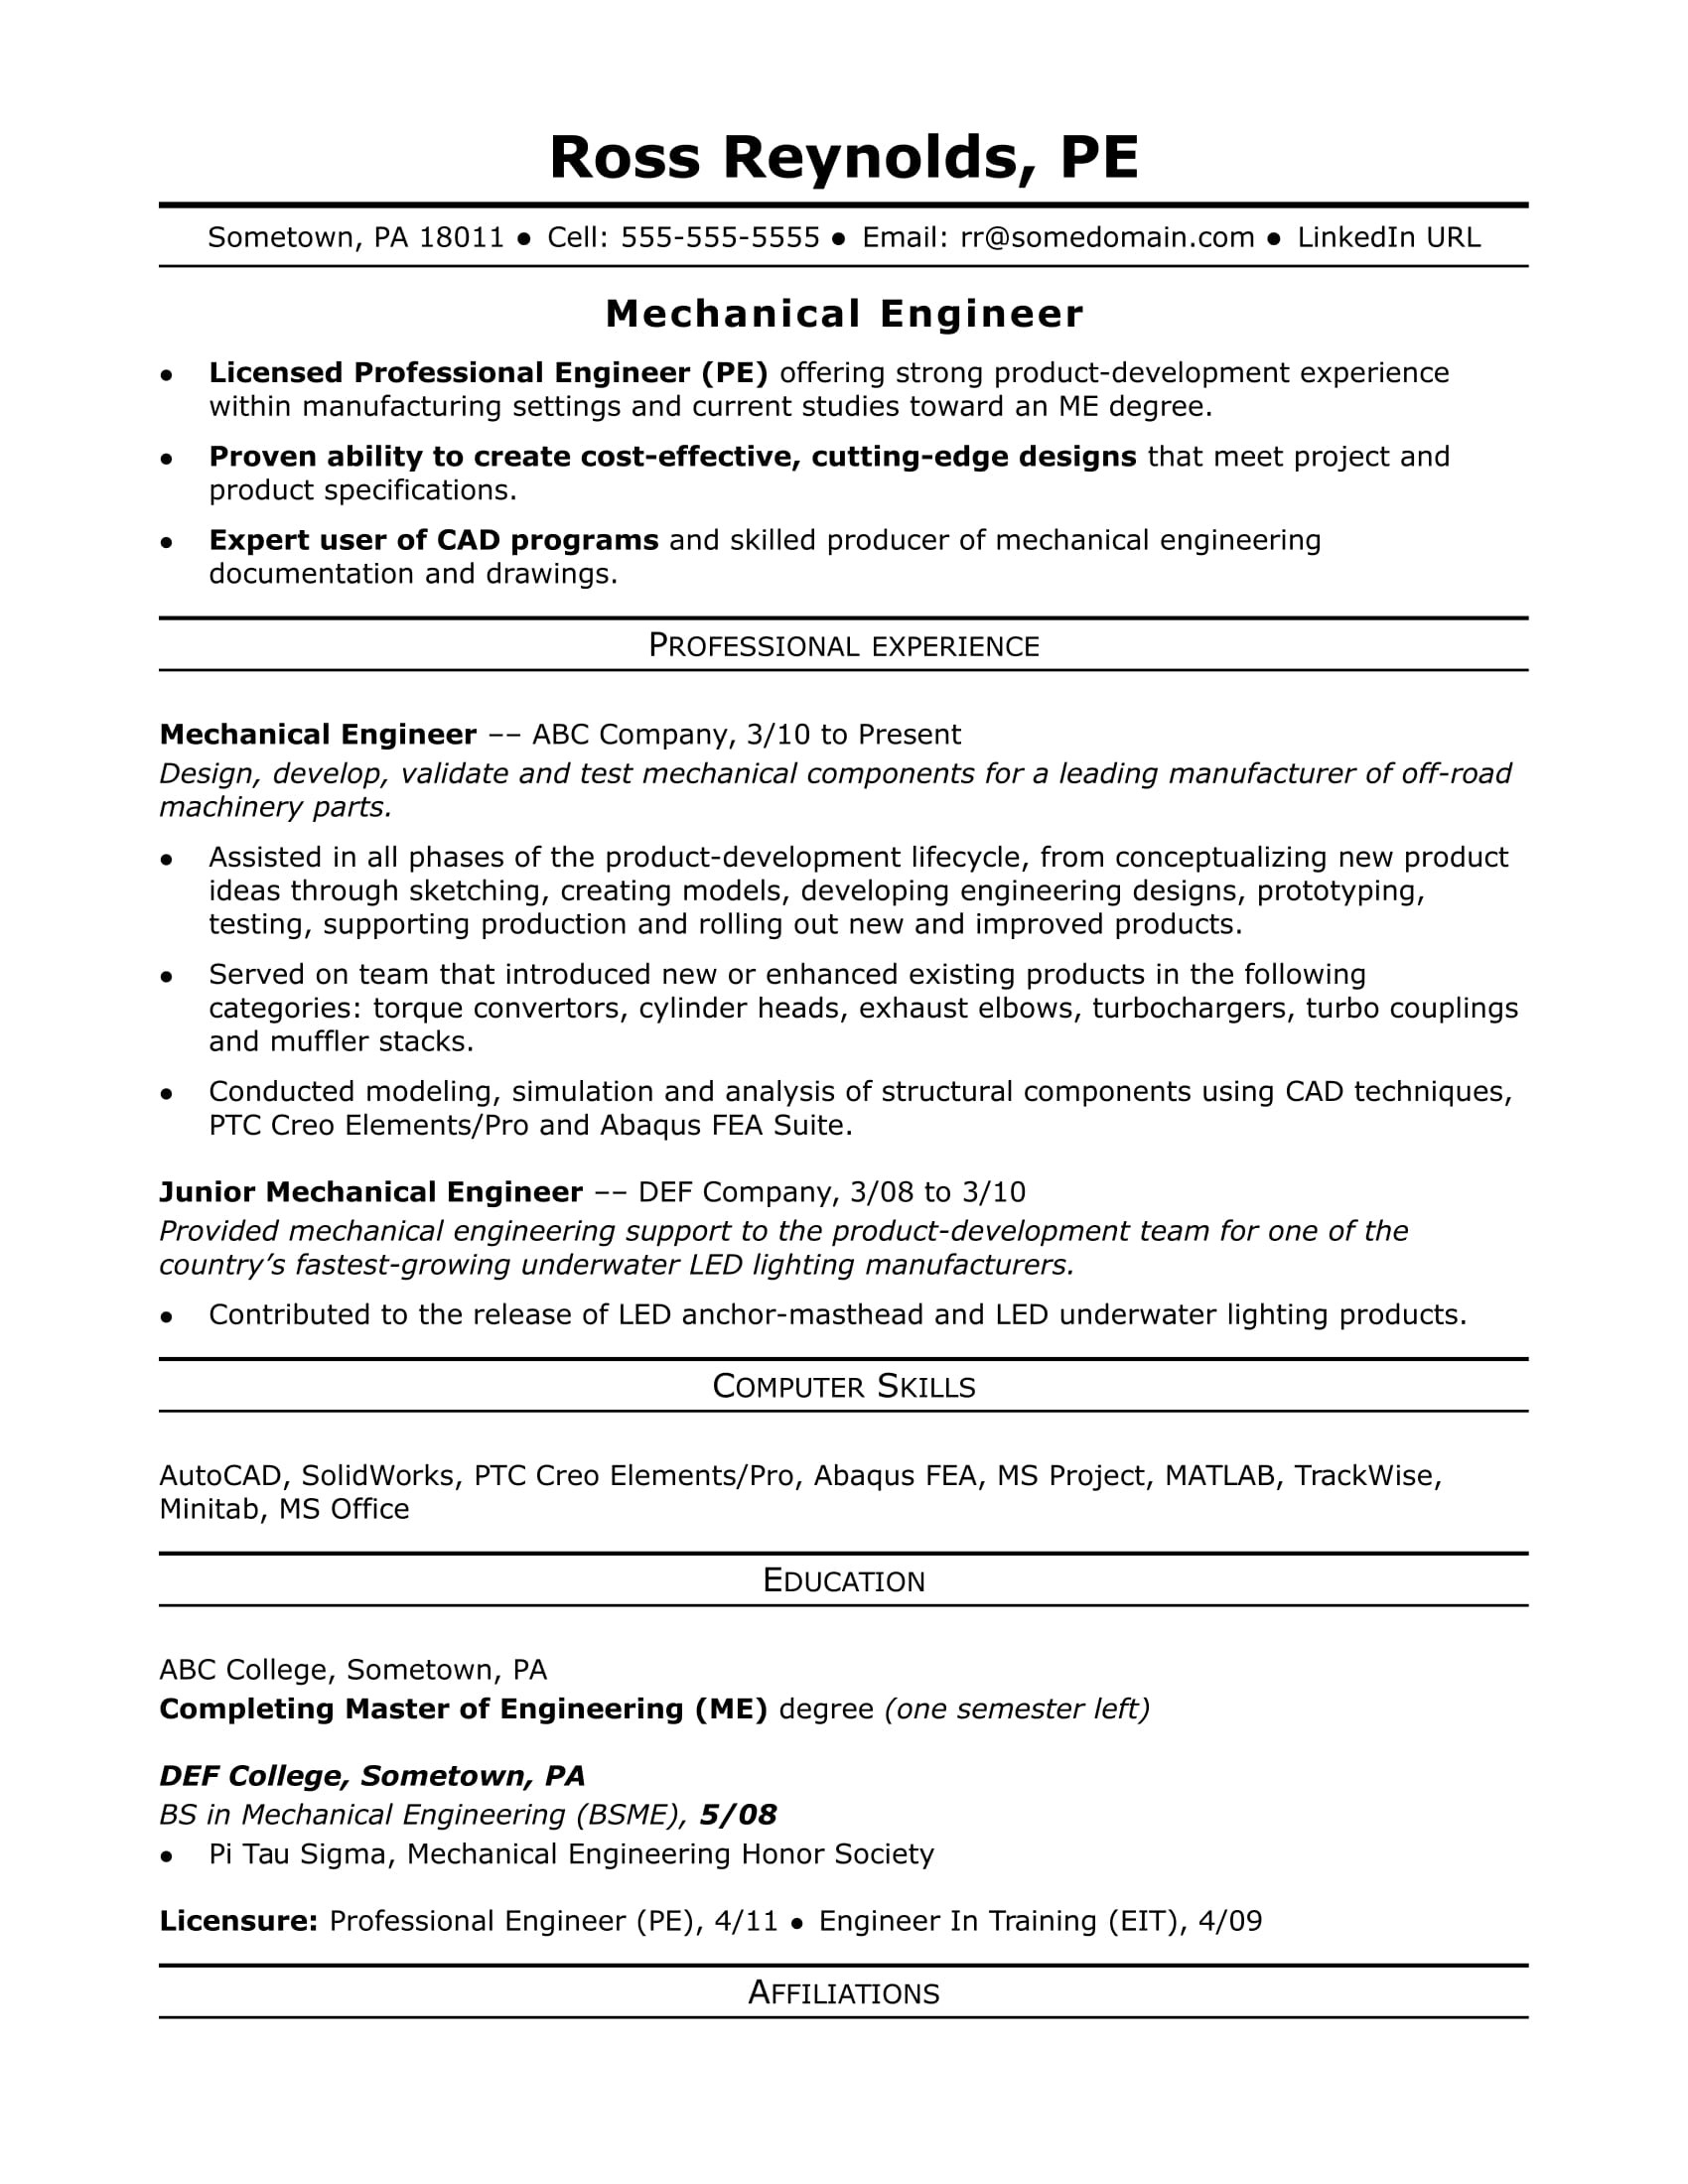 Sample Resume for Experienced Mechanical Engineer Sample Resume for A Midlevel Mechanical Engineer